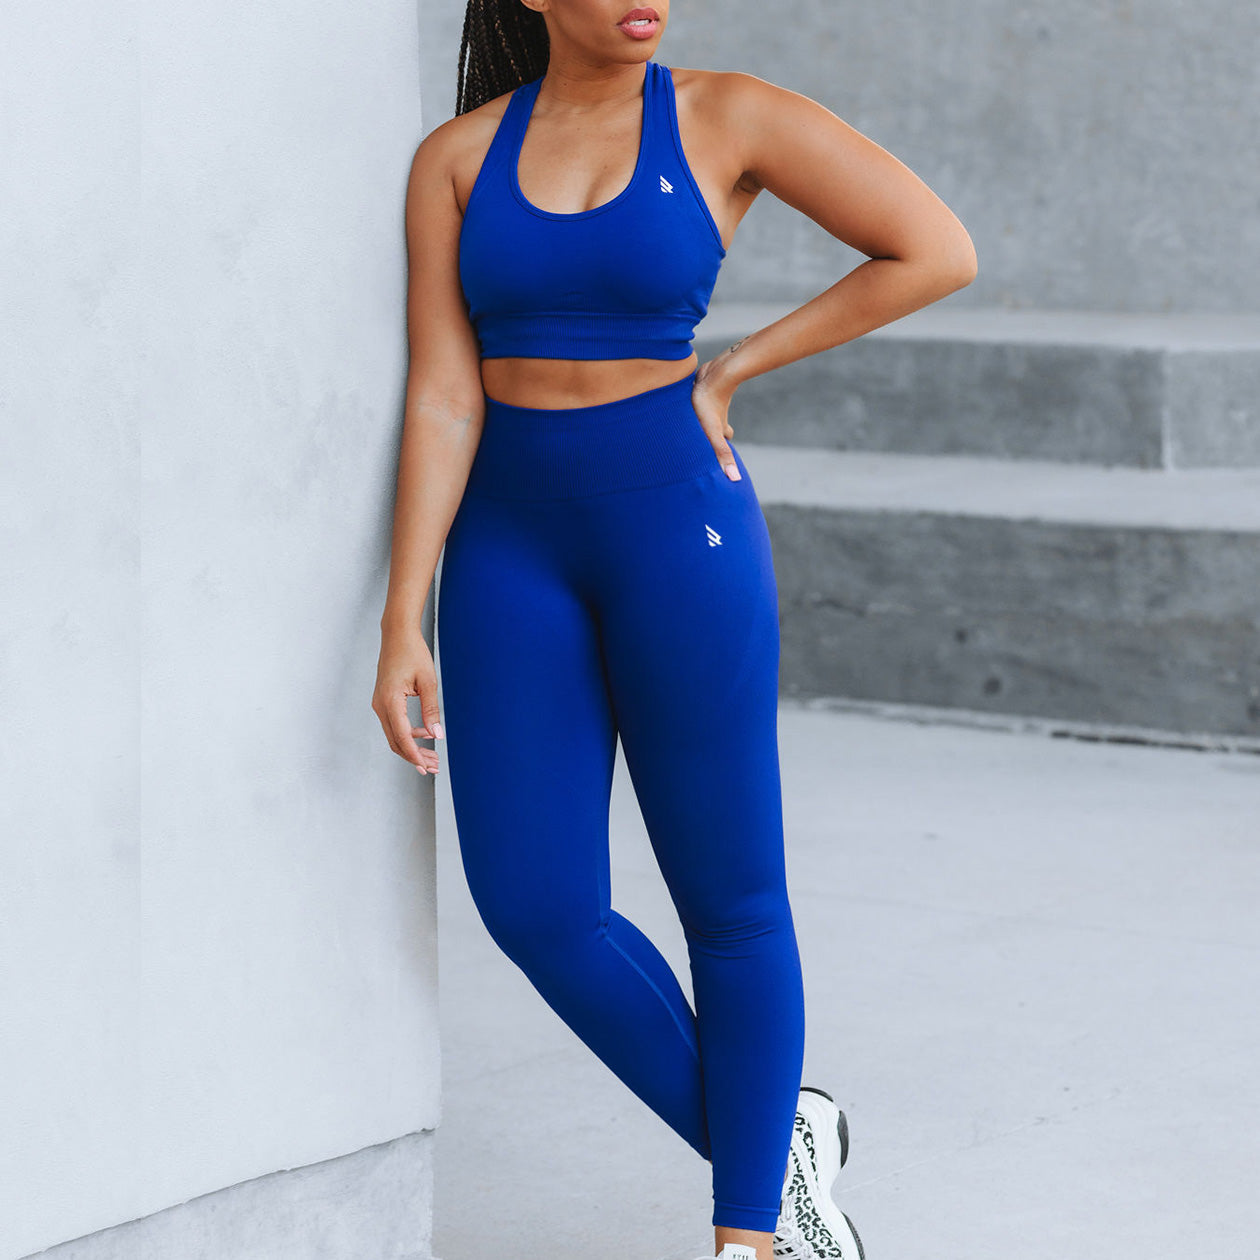 Solid Seamless Sports Bra in Cobalt Blue – Rebelious Fit